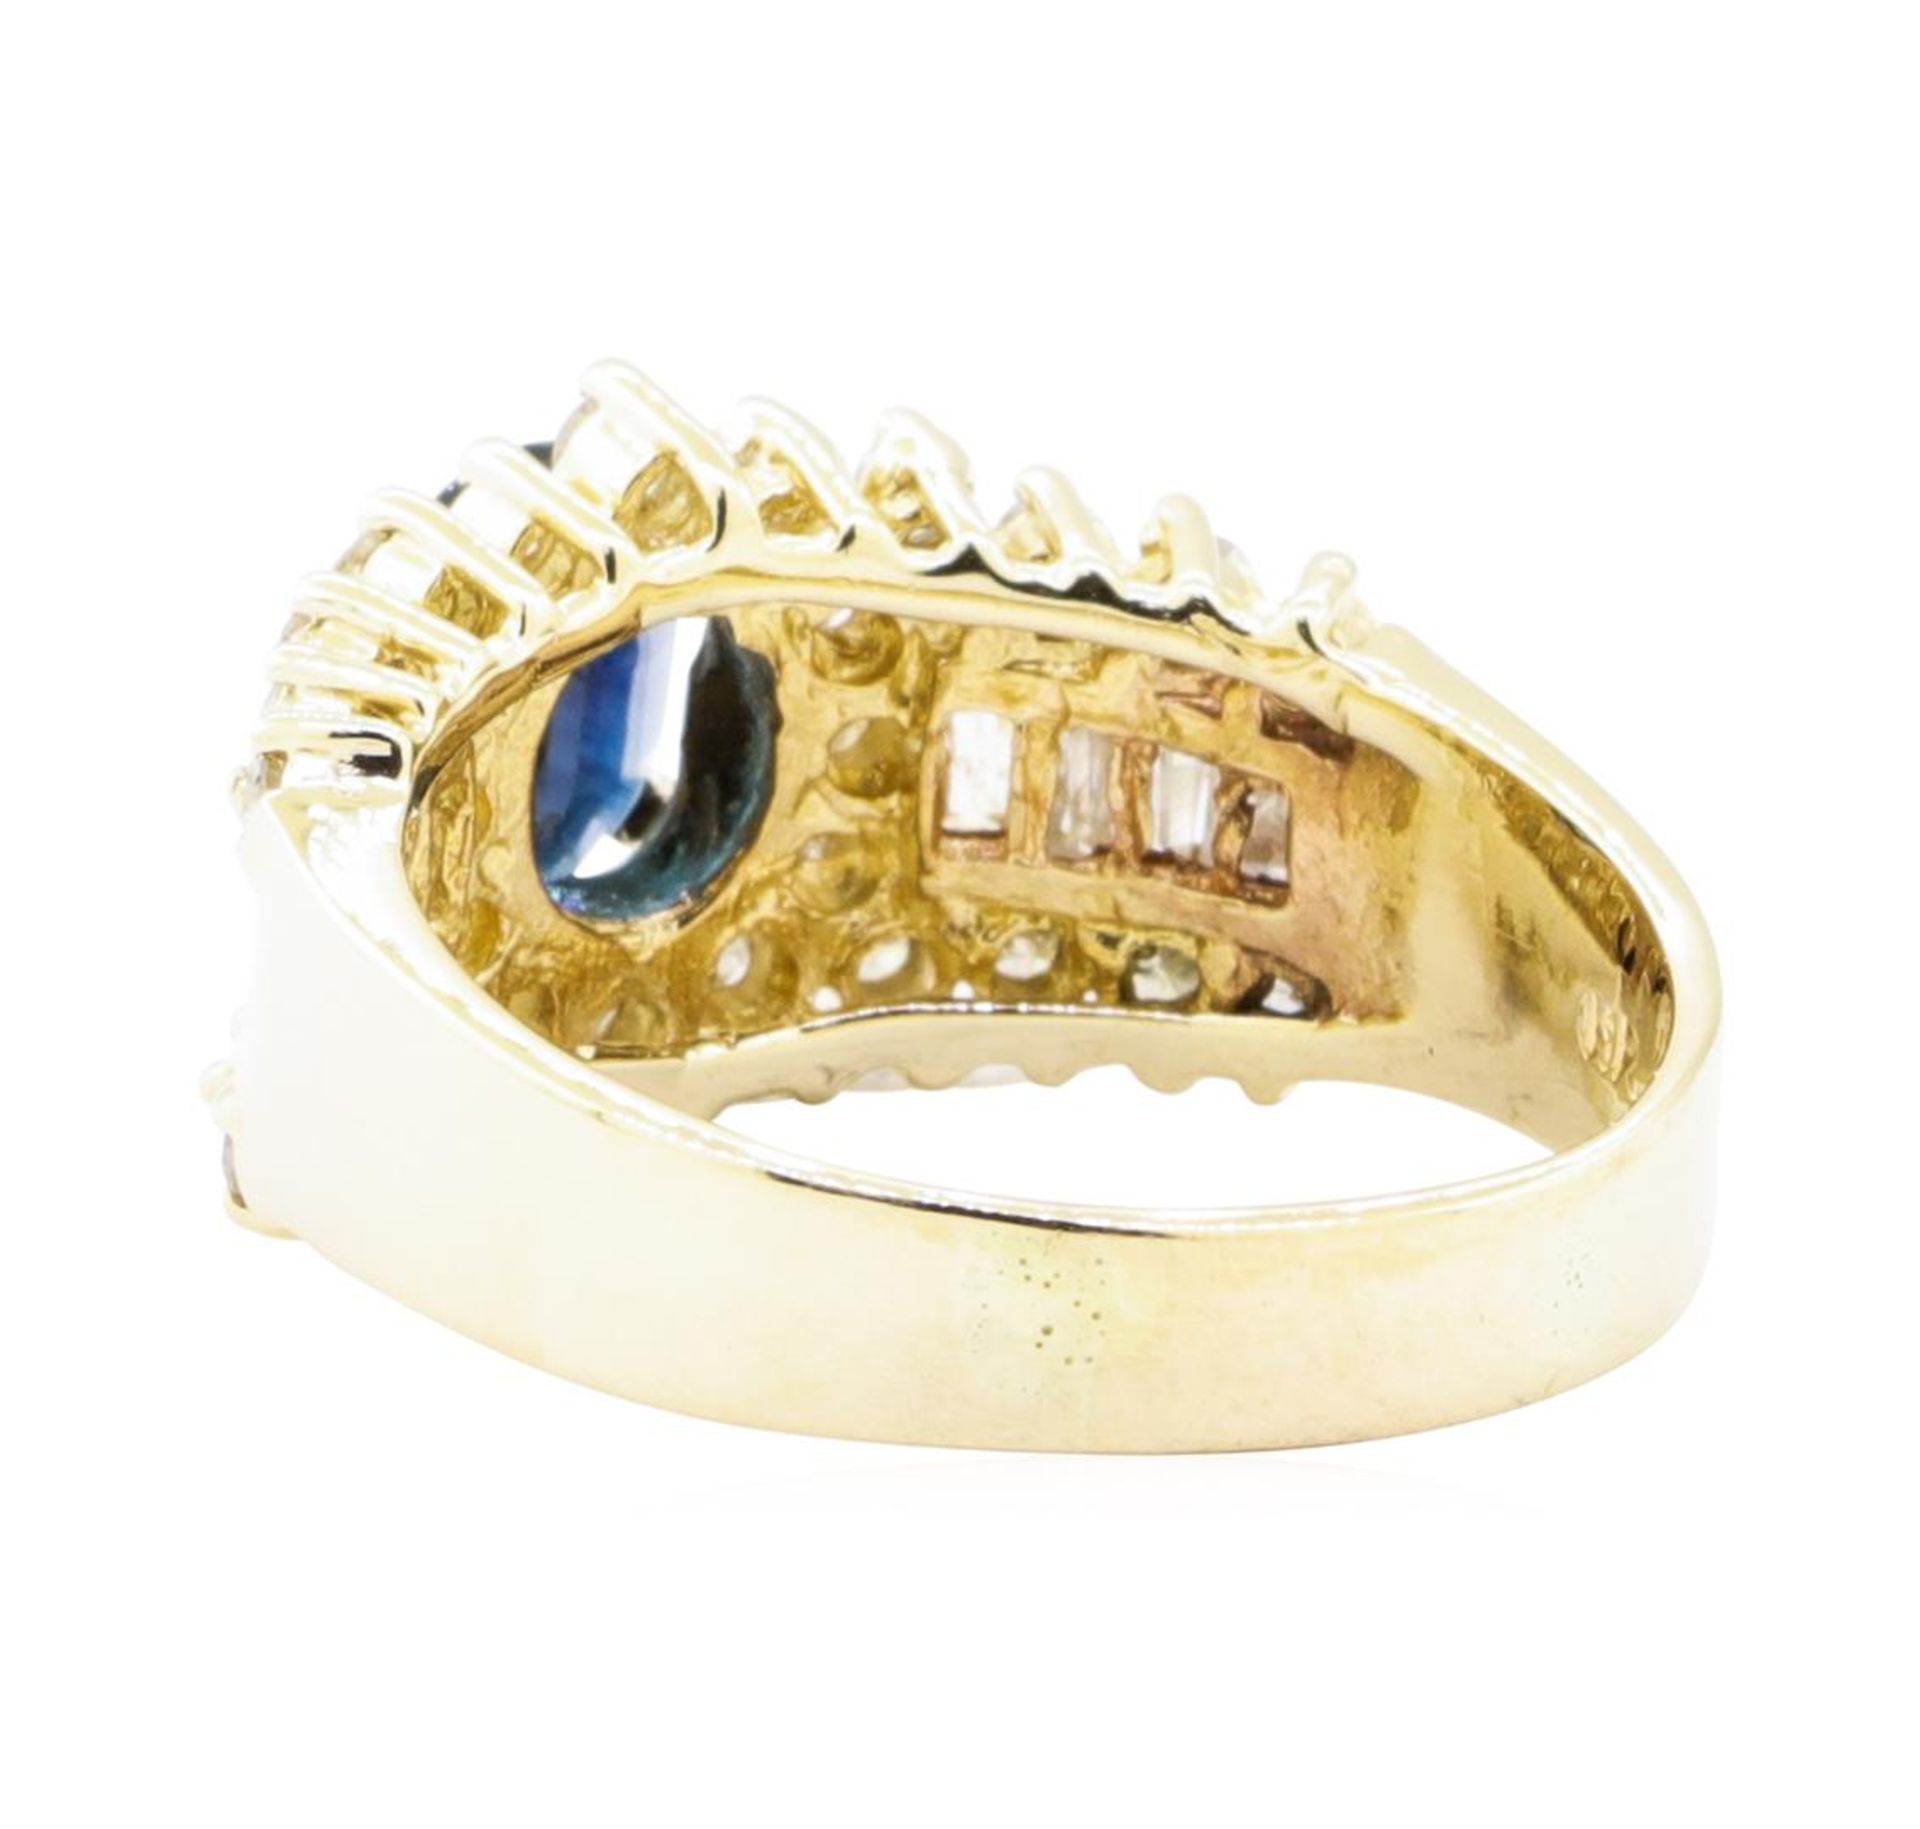 2.95 ctw Blue Sapphire And Diamond Ring - 14KT Yellow Gold - Image 3 of 5